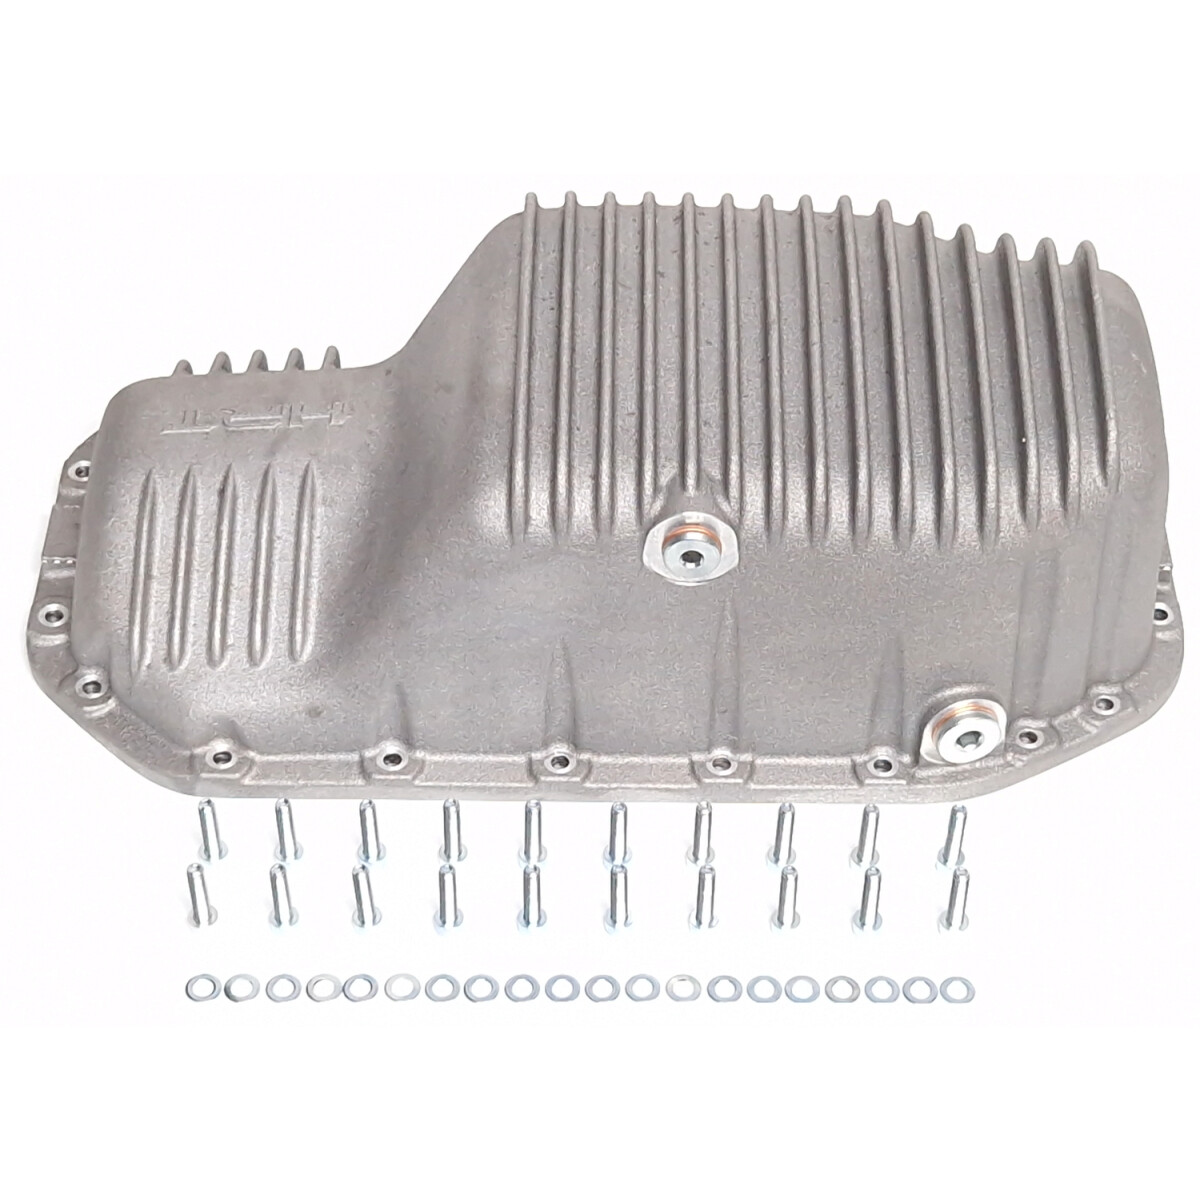 Aluminum oil pan with oil scots and cooling fins (all VW Polo 86(c) + G40)